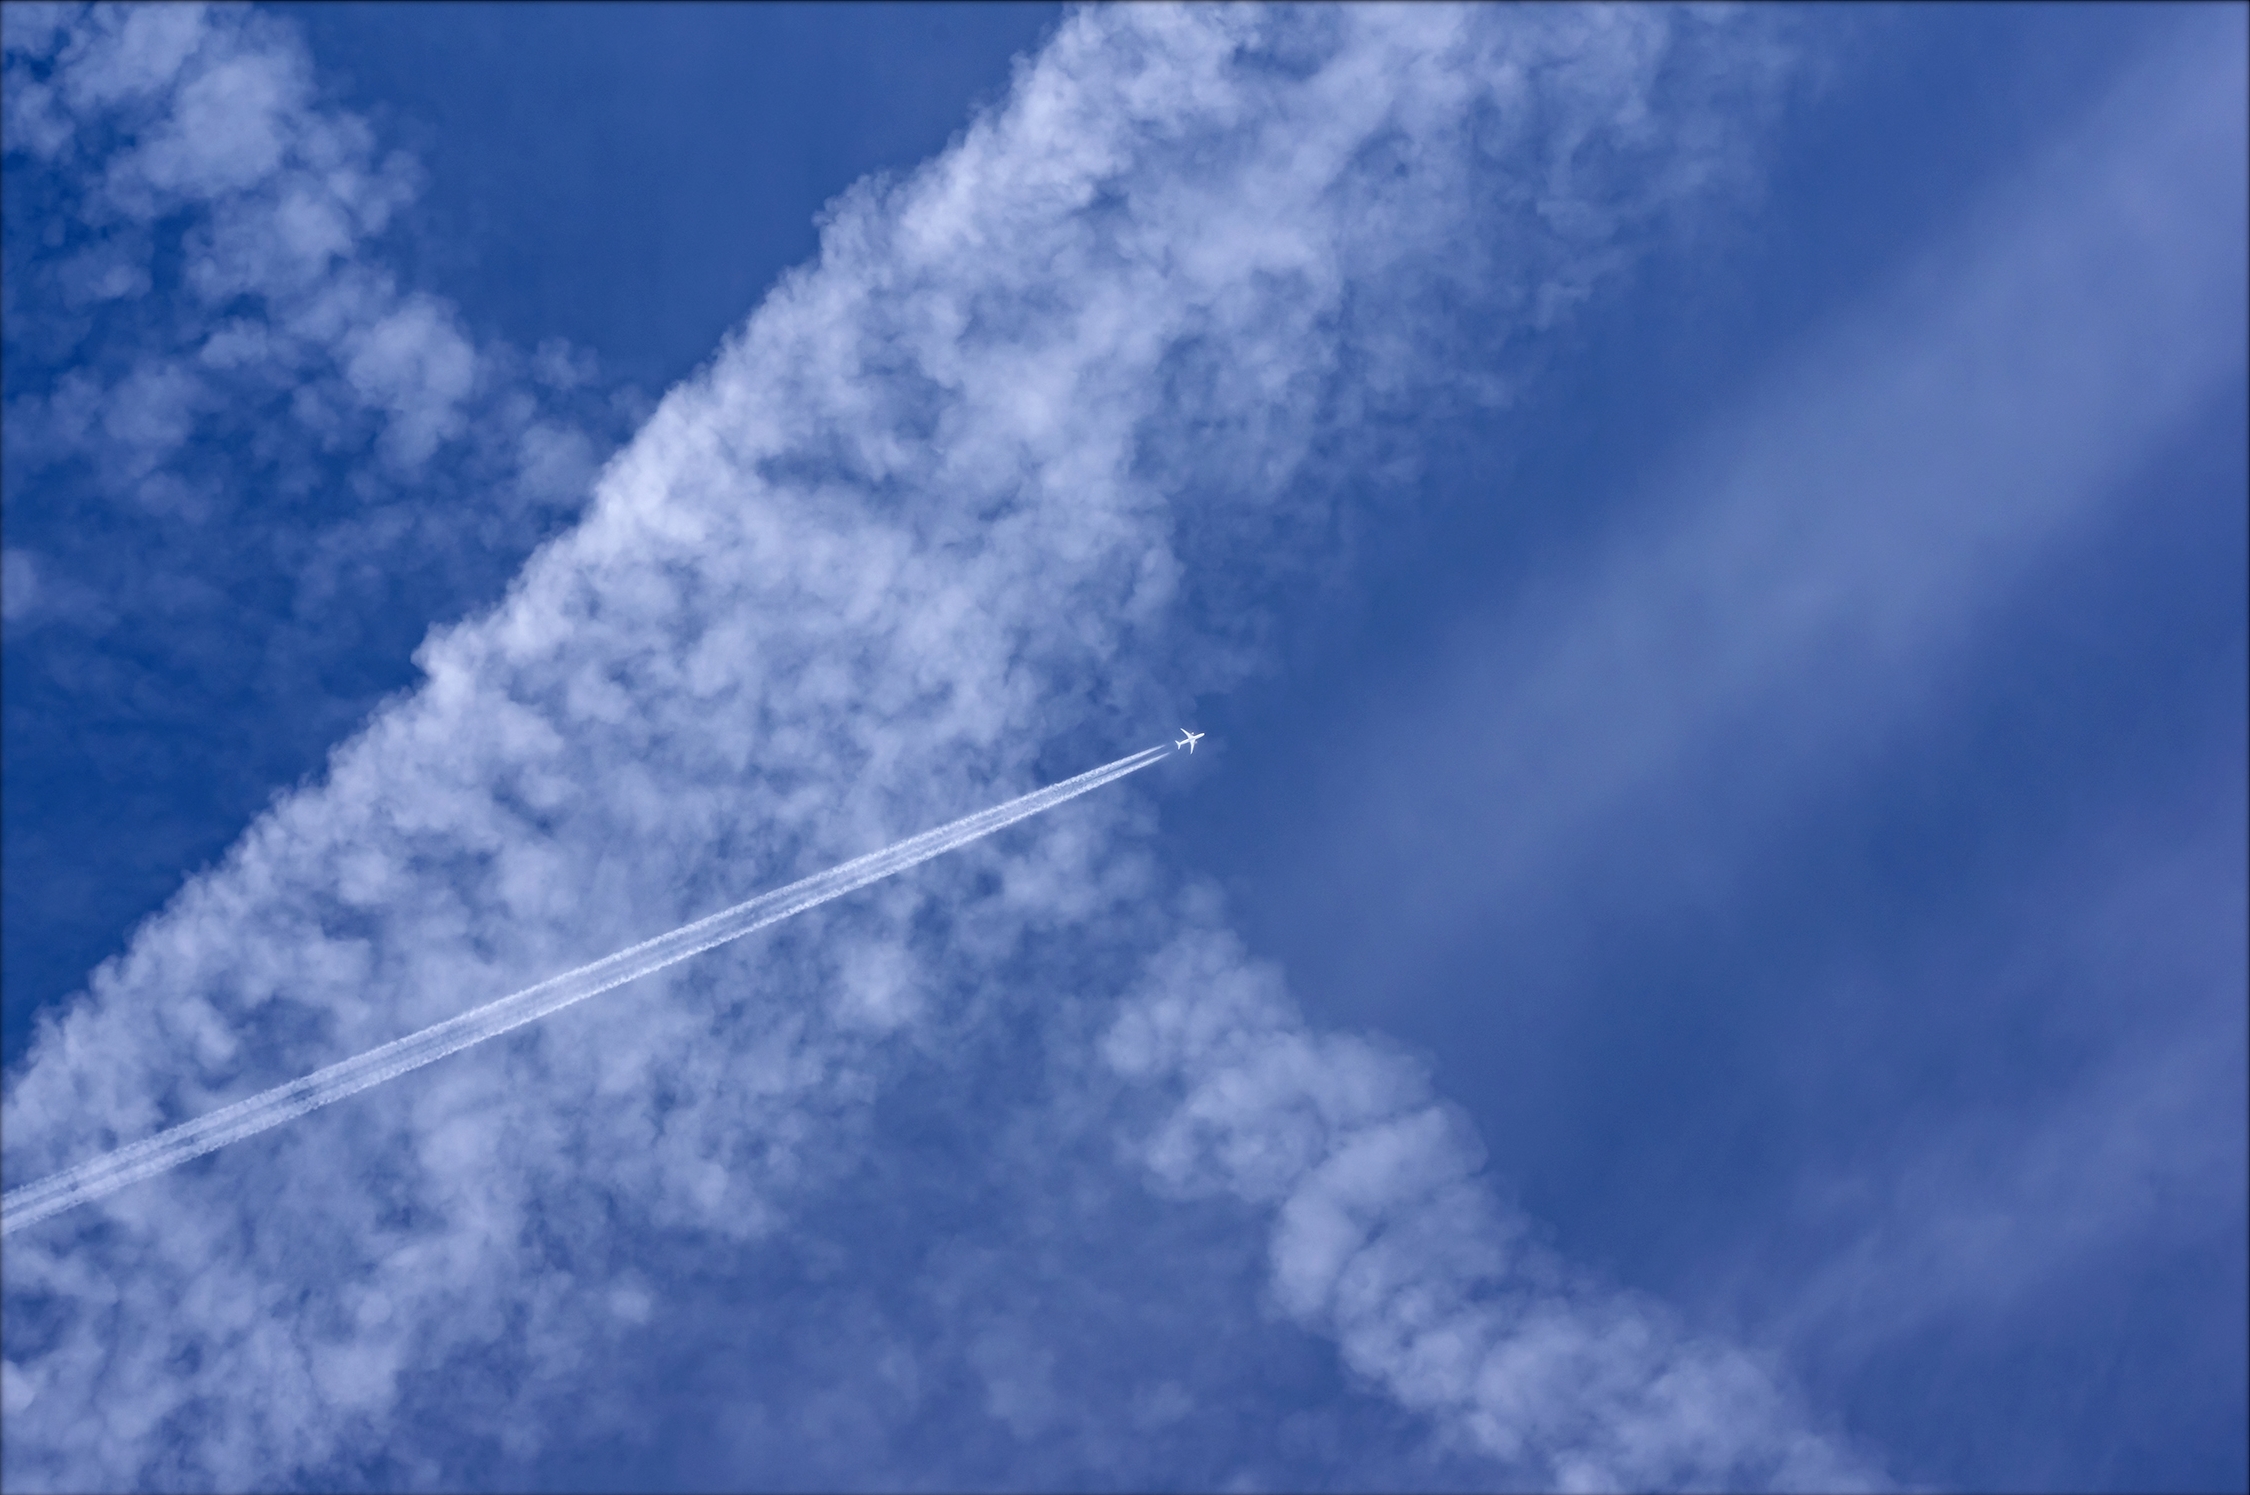 Wallpapers sky clouds aircraft on the desktop